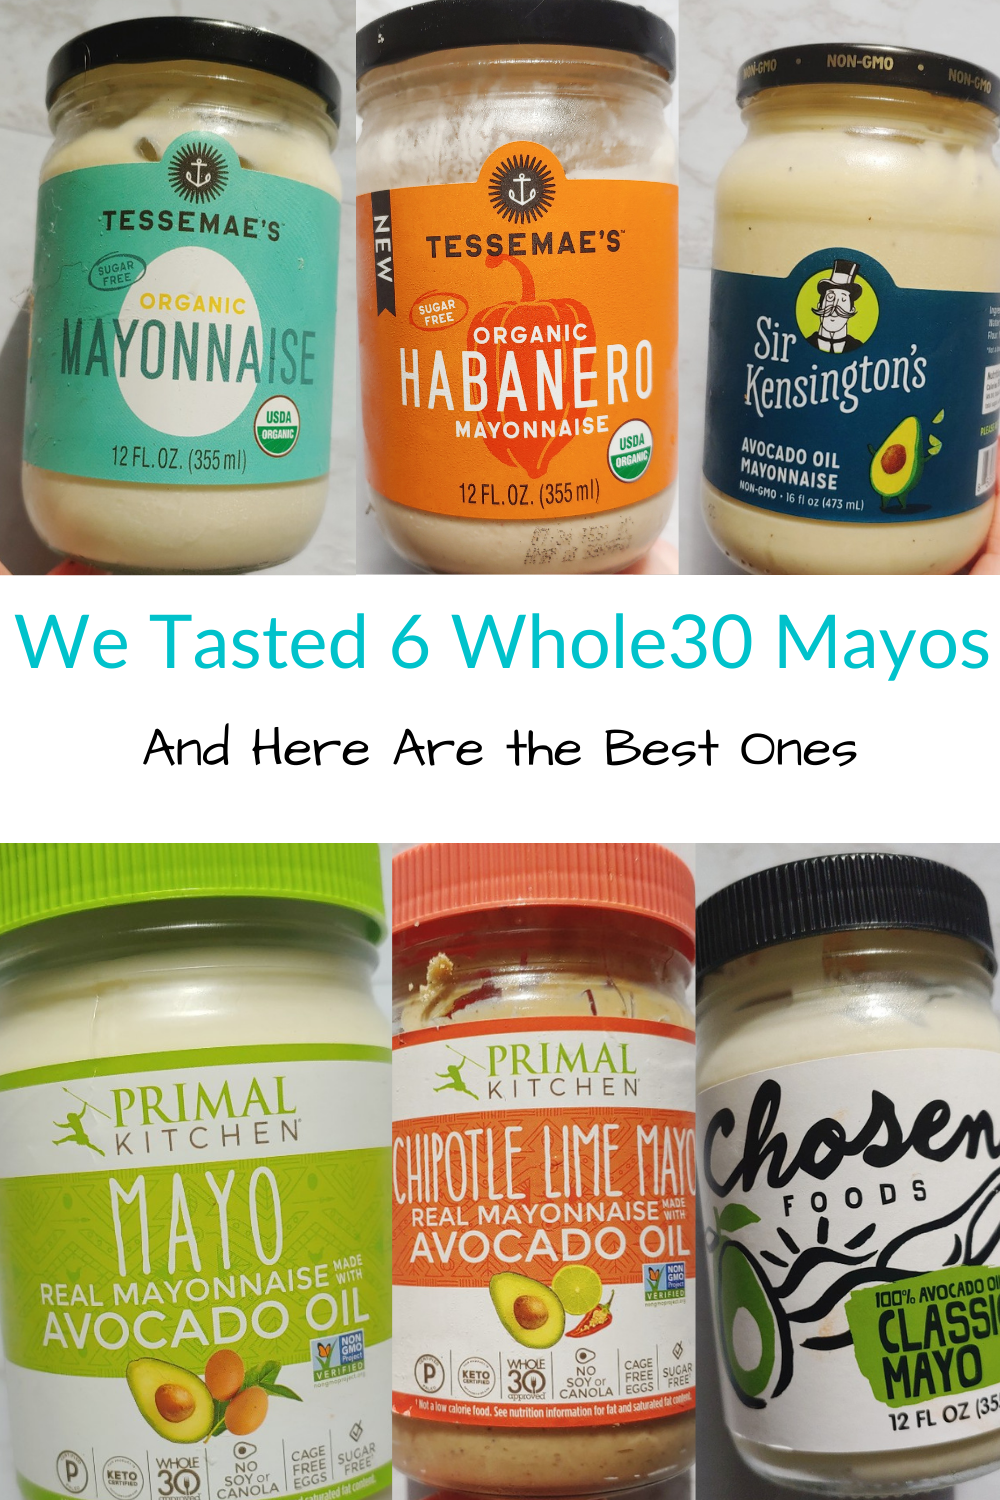 https://blissfulleating.com/wp-content/uploads/2020/10/Whole30-Mayo-Taste-Test.png